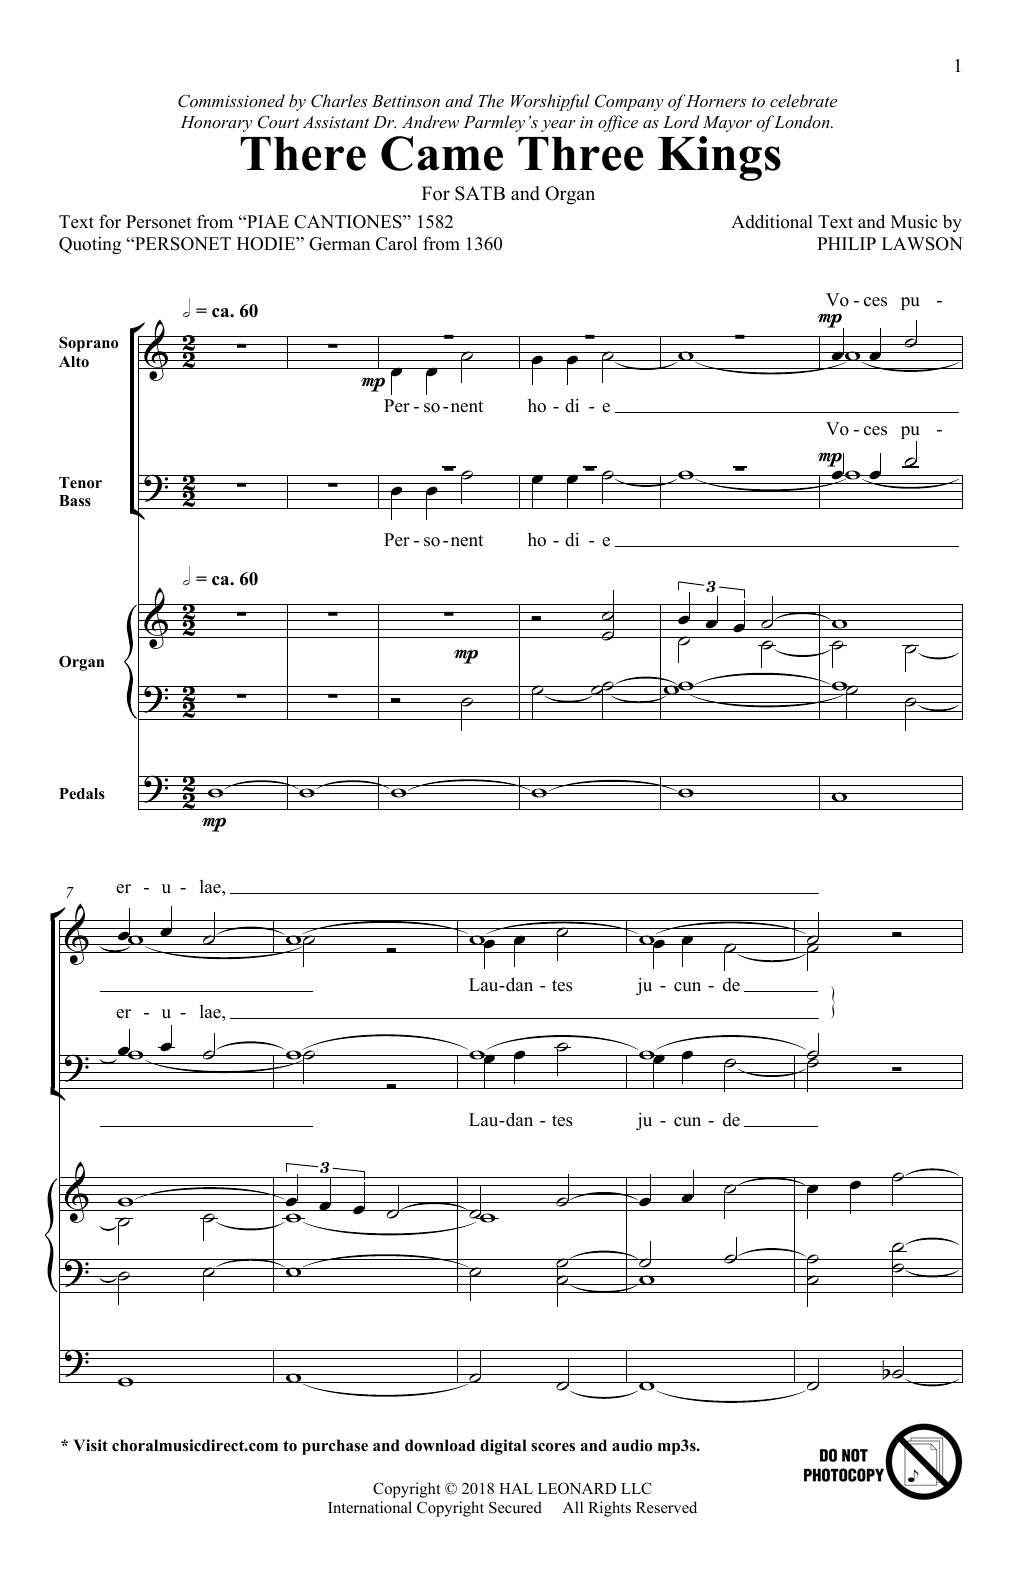 Download Philip Lawson There Came Three Kings Sheet Music